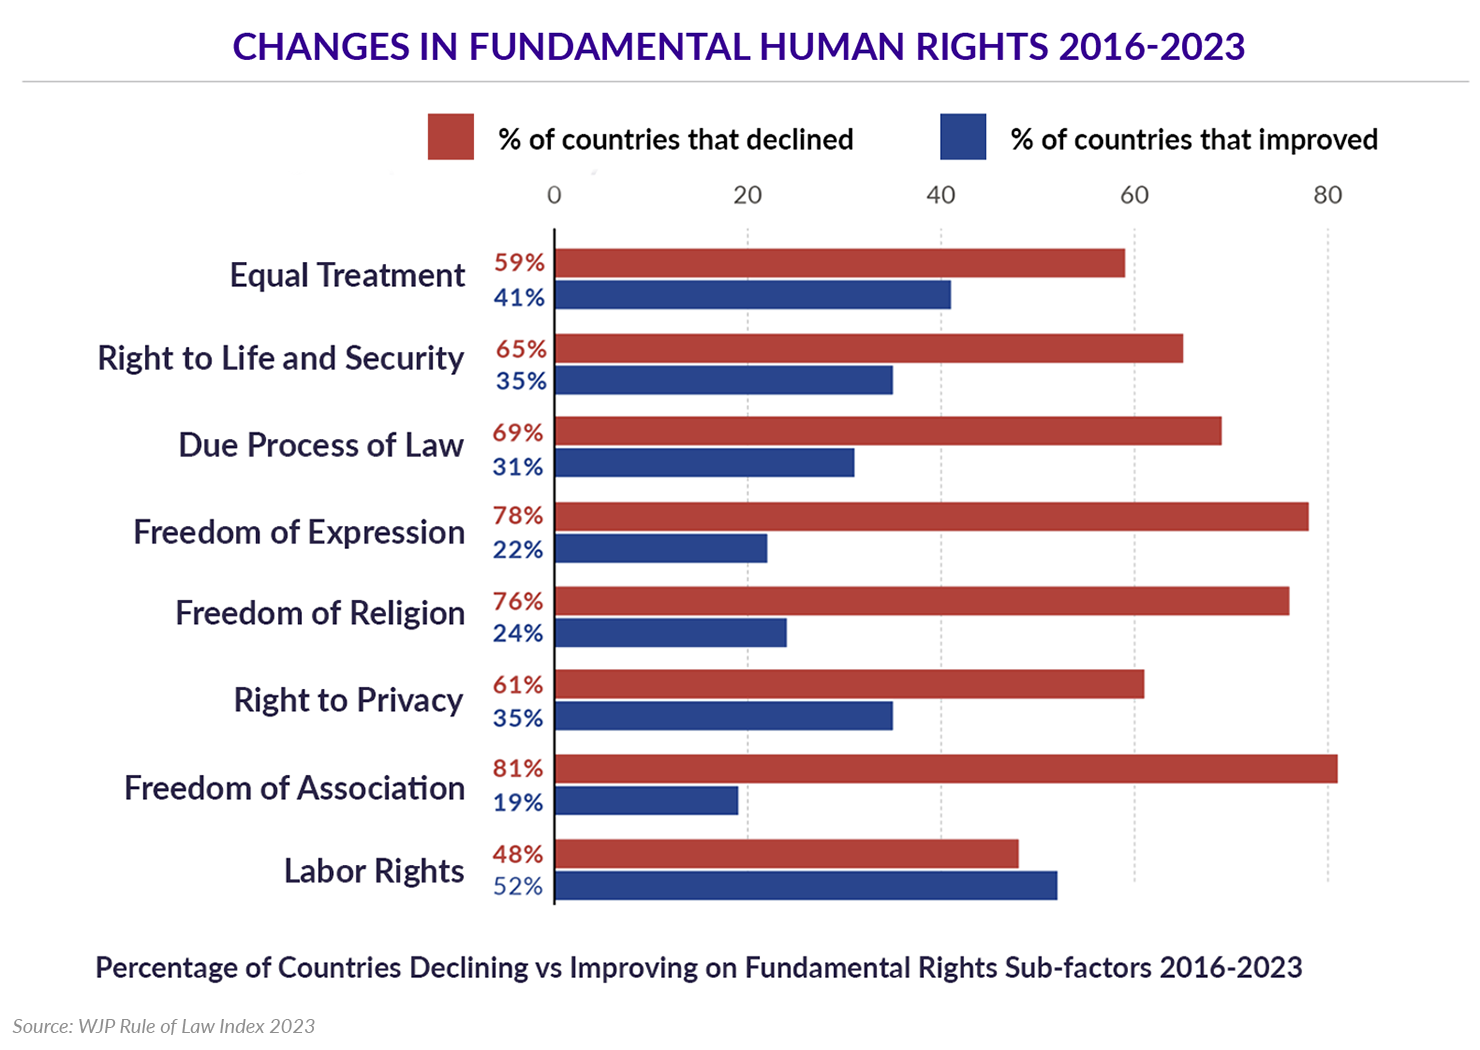 Changes in Fundamental Rights 2016-2023